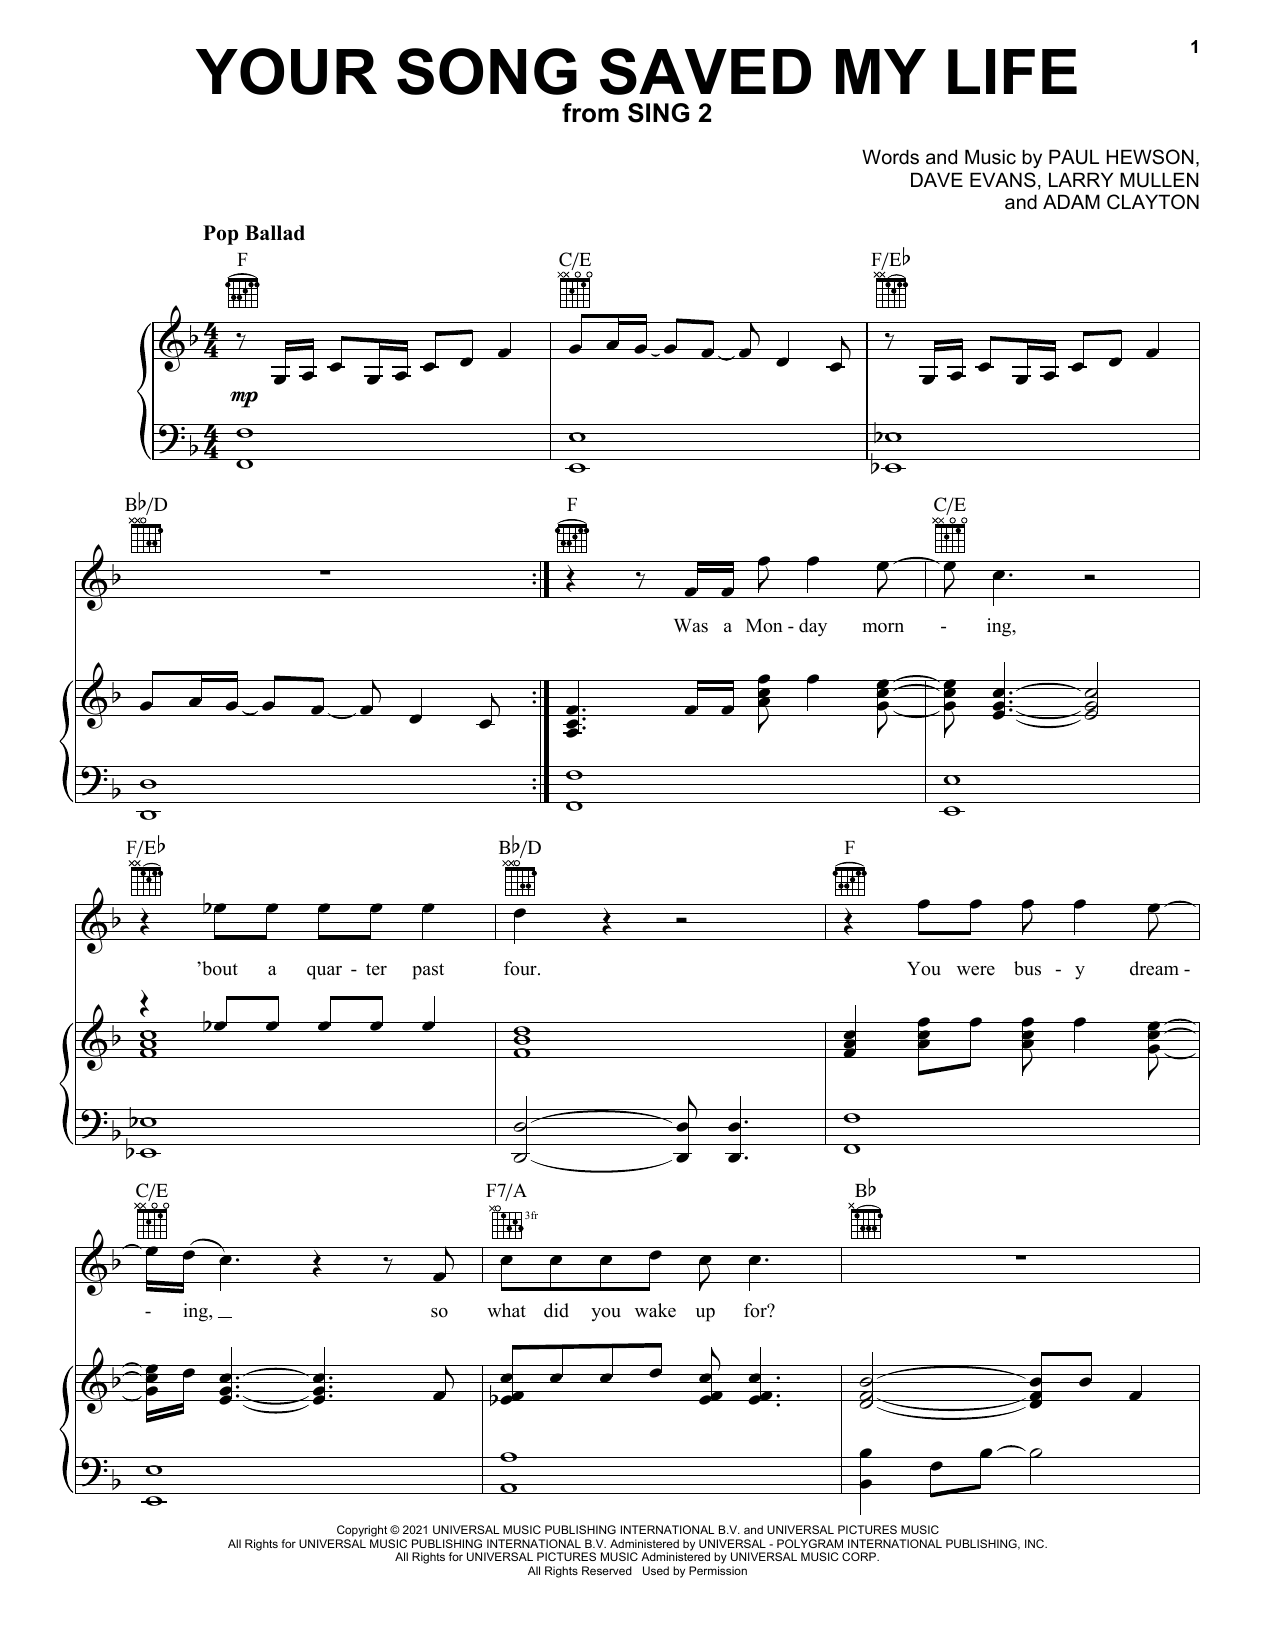 Download U2 Your Song Saved My Life (from Sing 2) Sheet Music